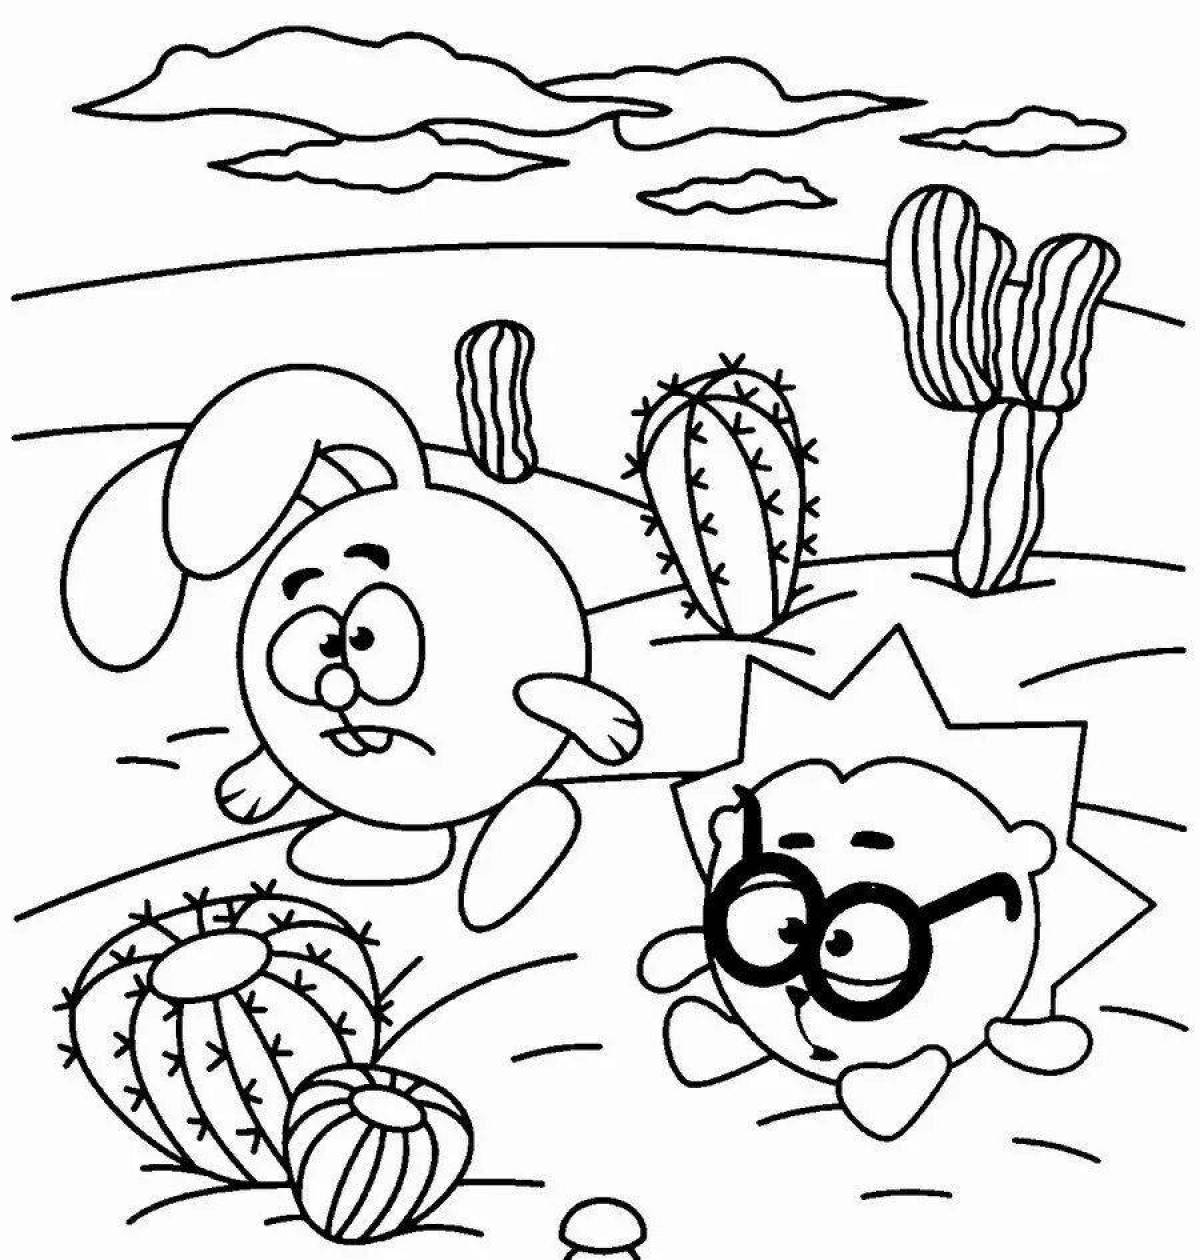 Attractive printable coloring book for kids in pdf format